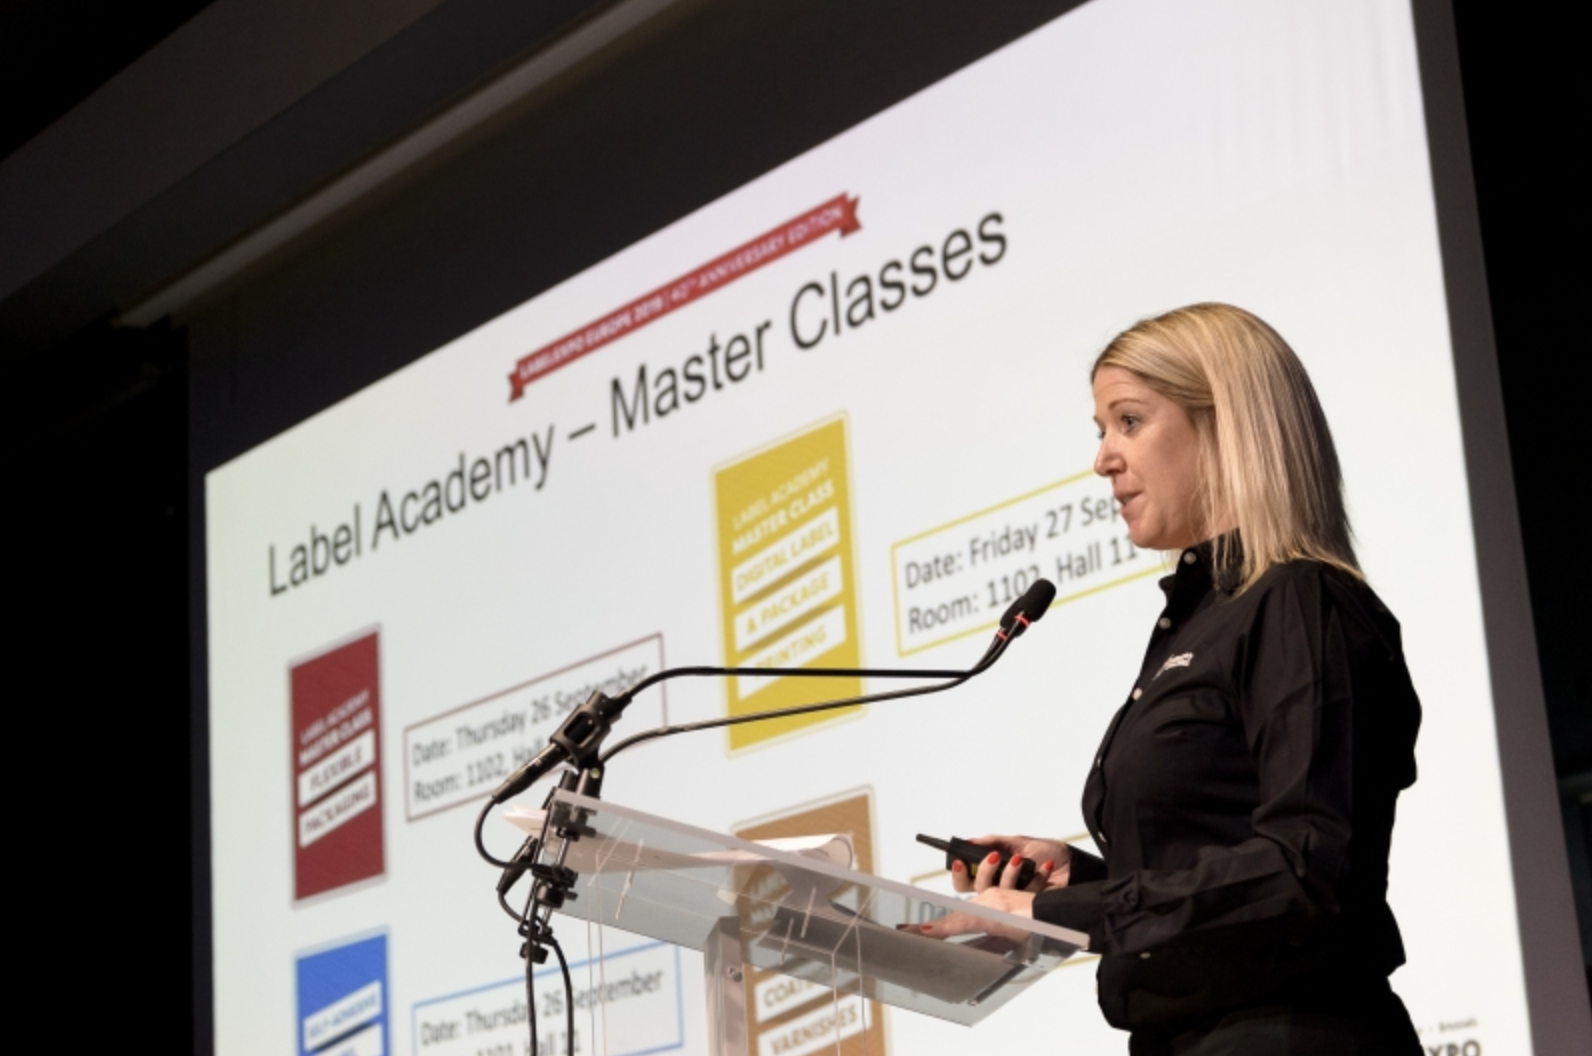 Label Academy Master Classes Labelexpo Europe 2019